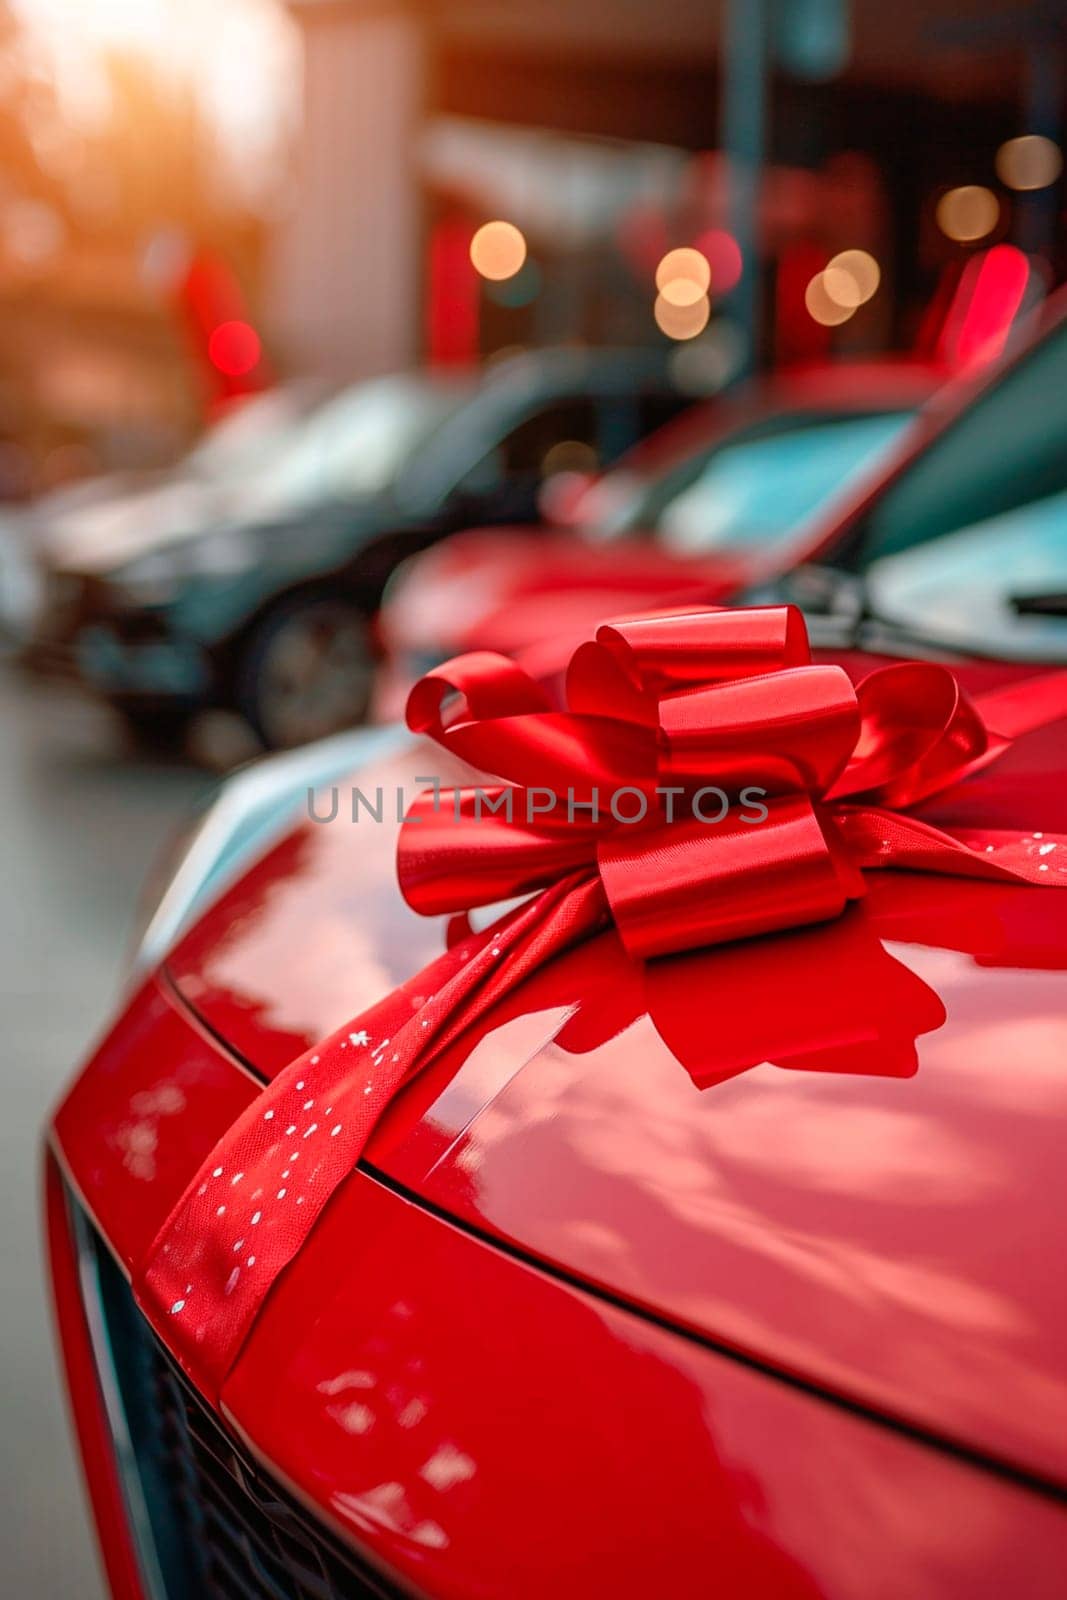 red car with a bow gift. Selective focus. happy.